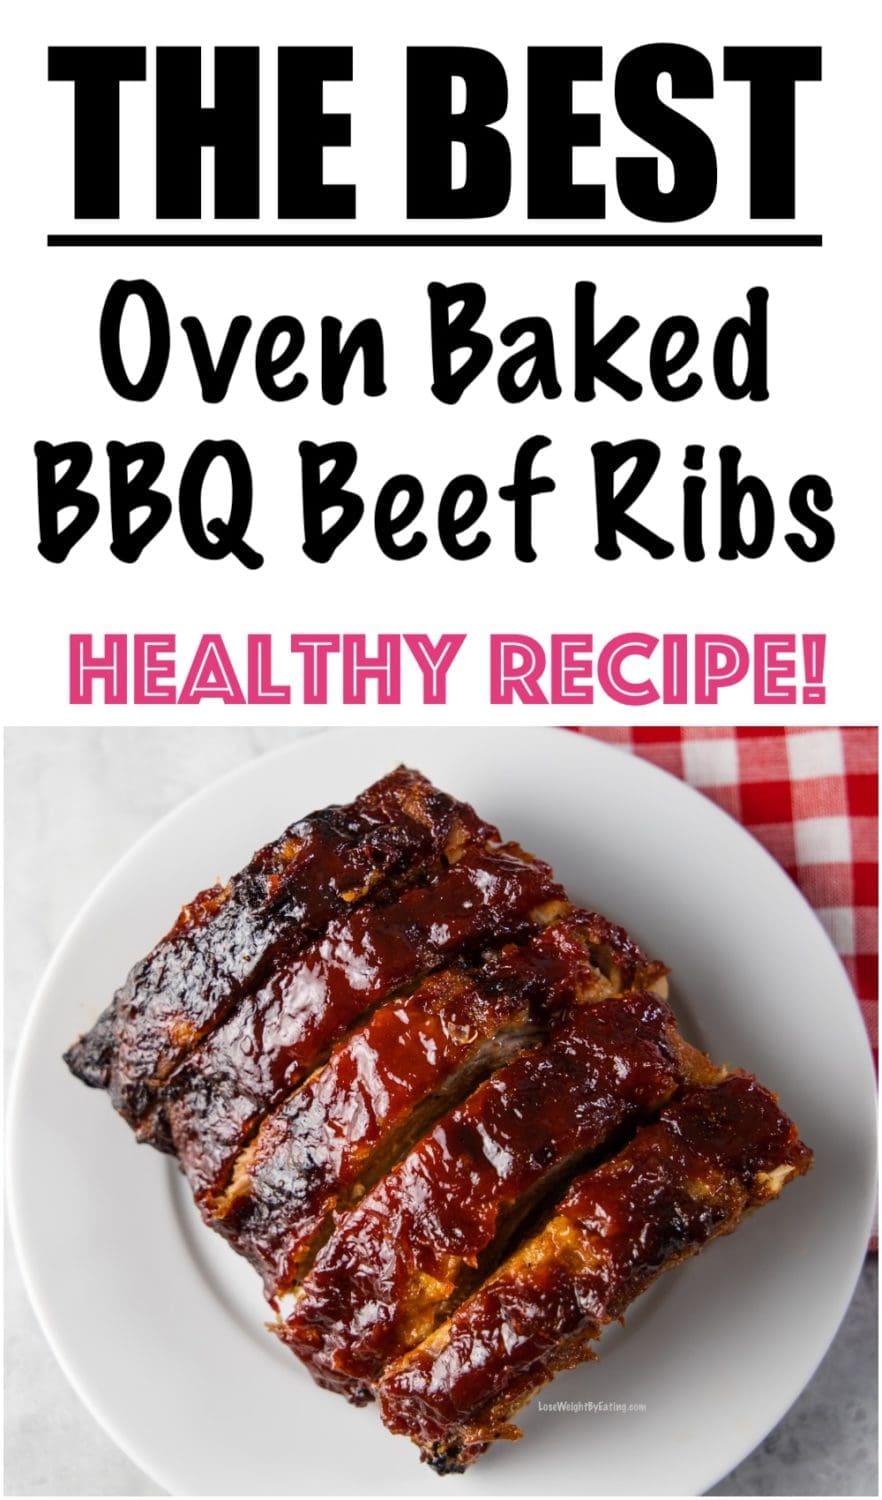 Oven Baked Beef Ribs Recipe